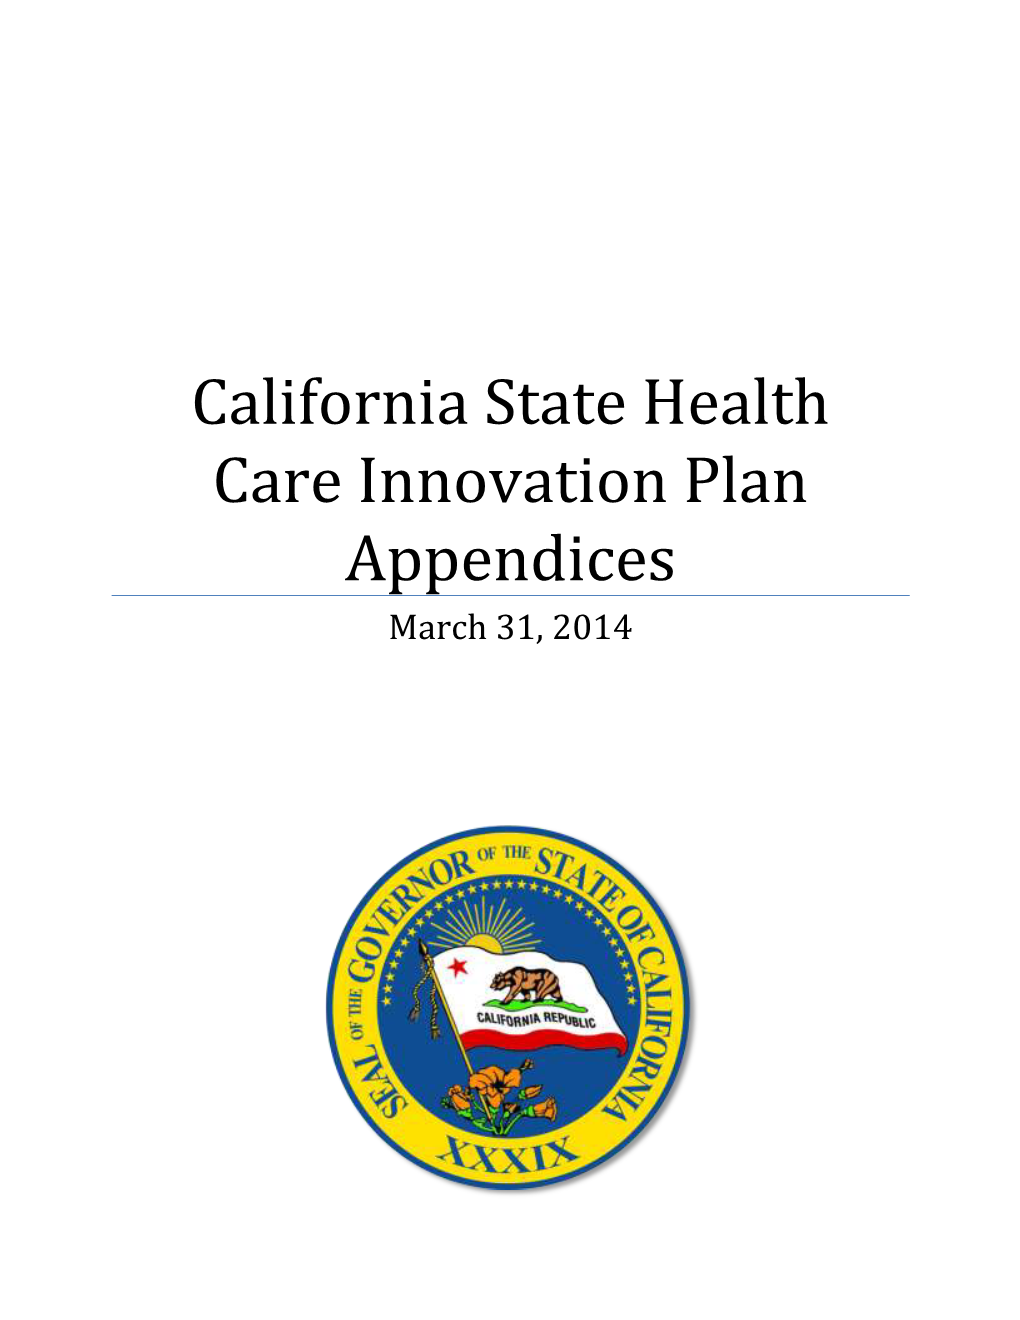 California State Health Care Innovation Plan Appendices March 31, 2014